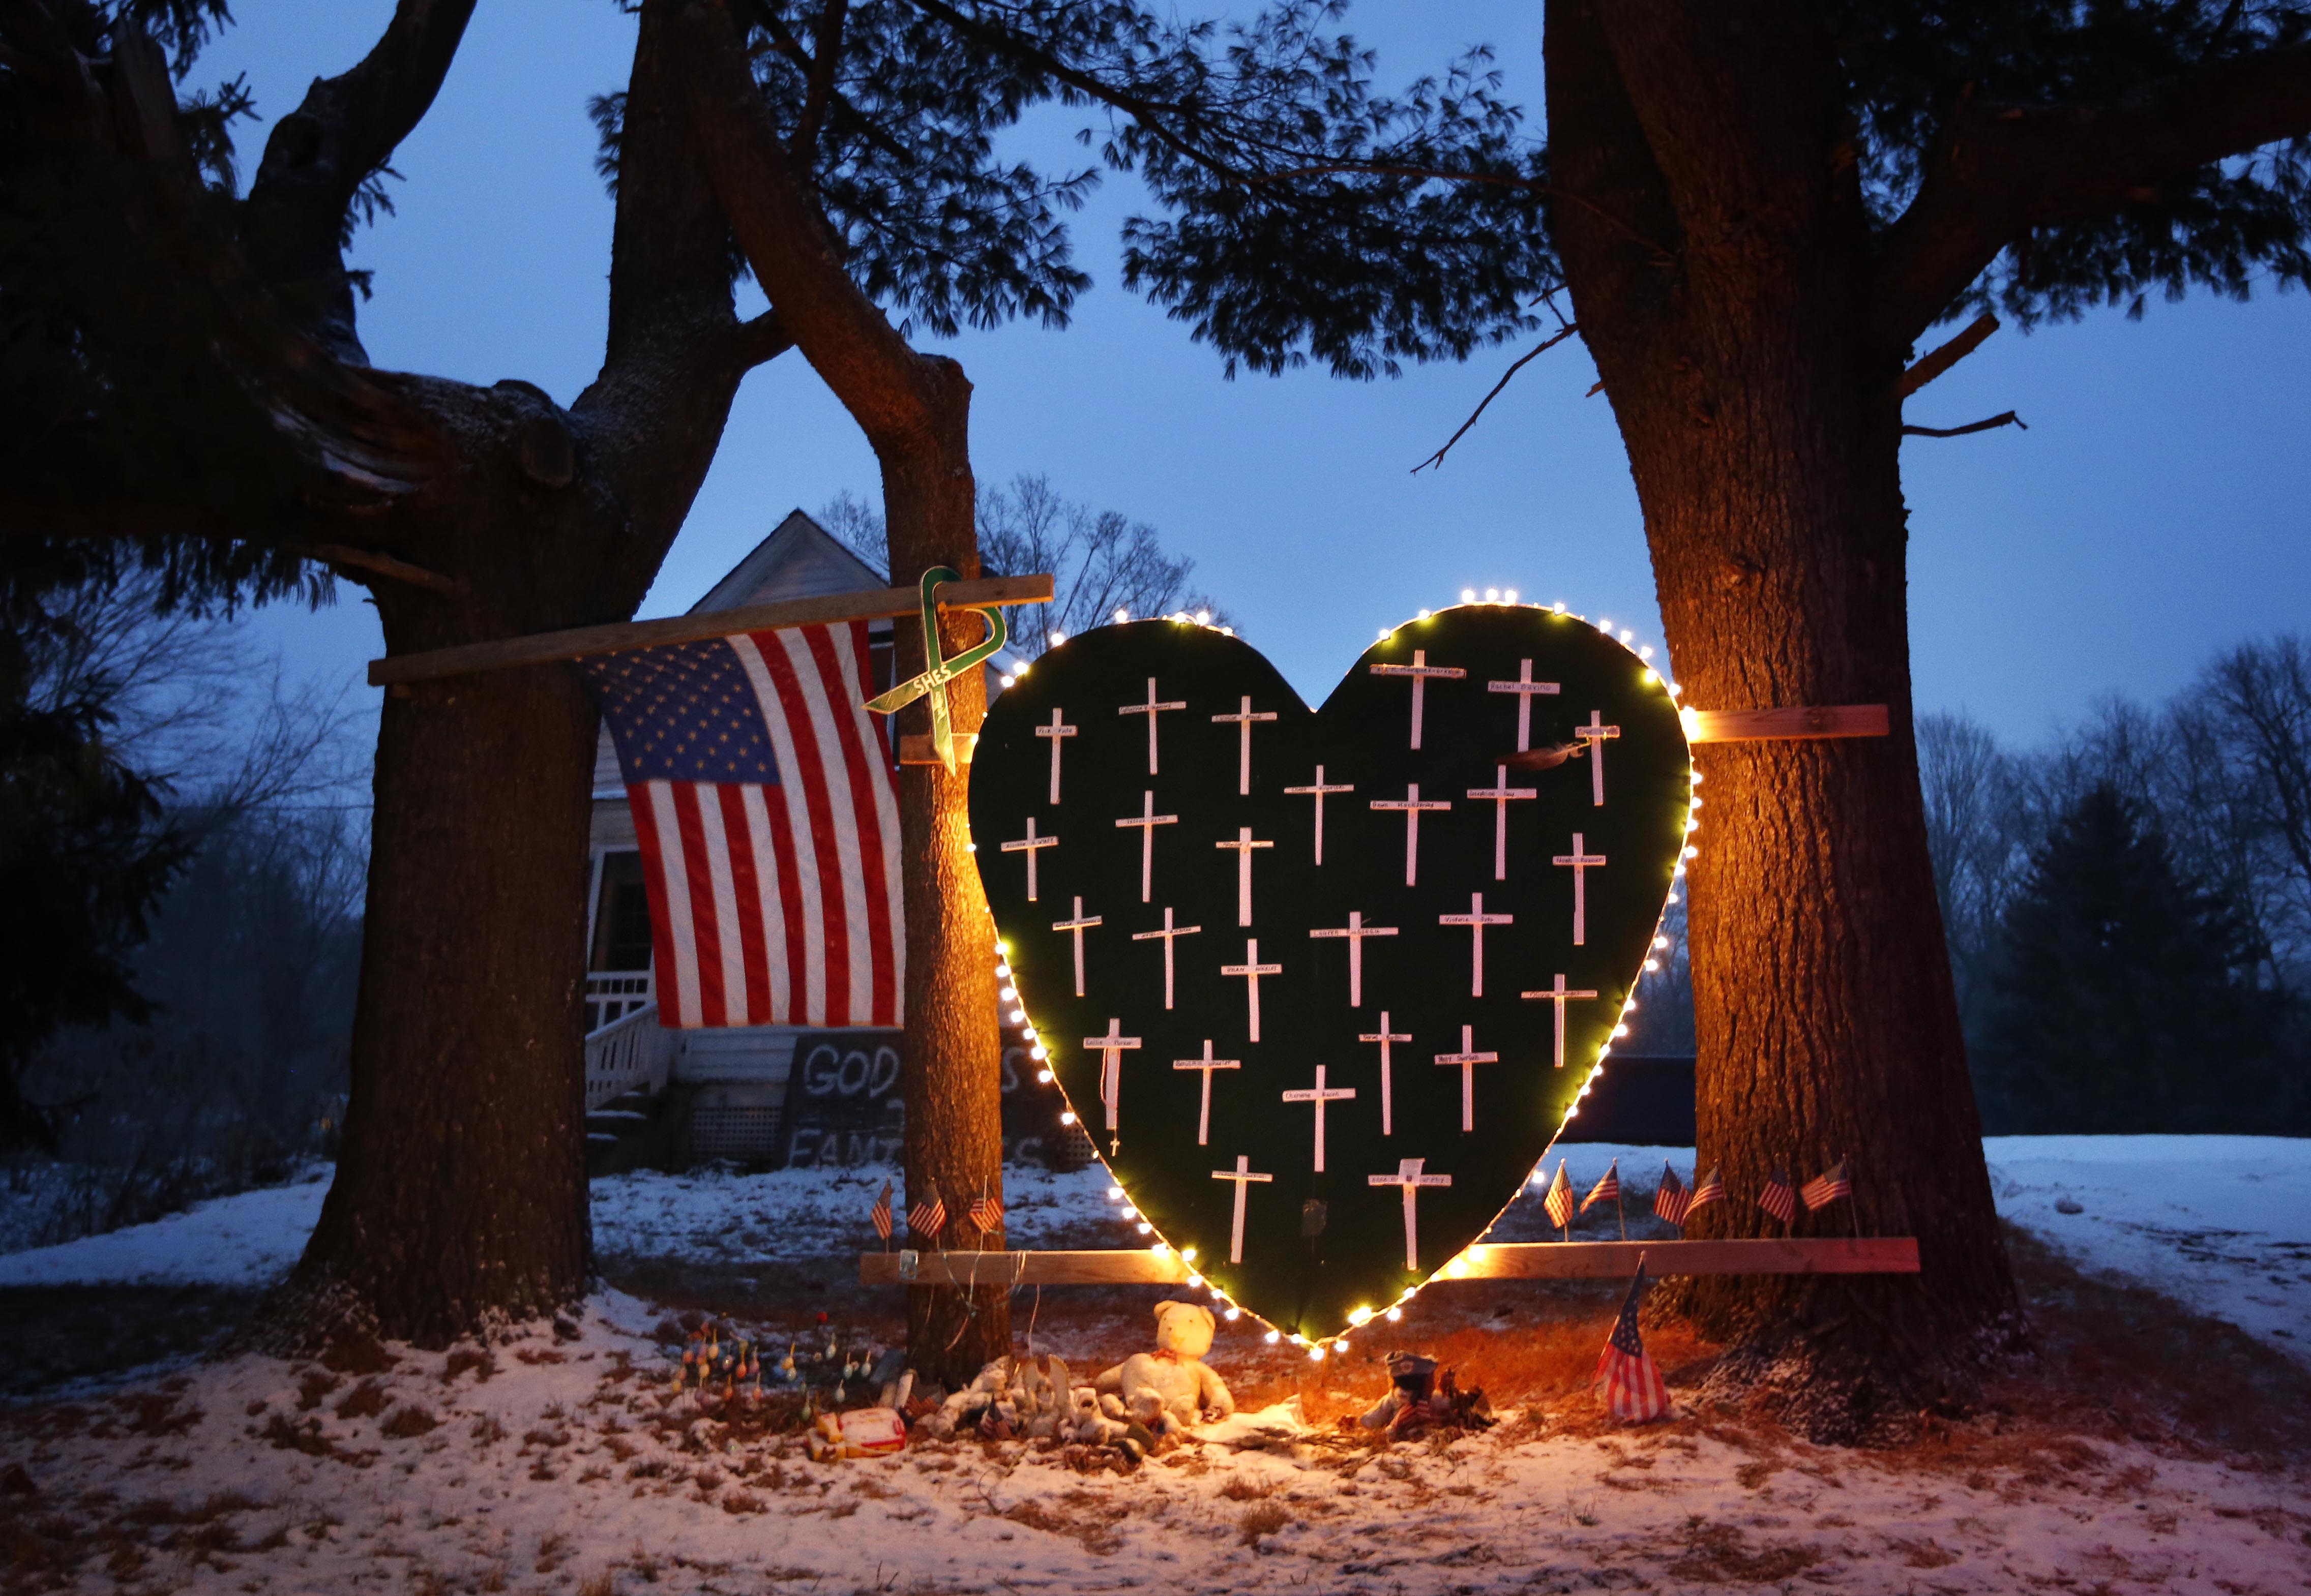 A makeshift memorial with crosses for the victims of the Sandy Hook massacre stands outside a home in Newtown, Conn., on Dec. 14, 2013, the one-year anniversary of the shootings. (Robert F. Bukaty—AP)